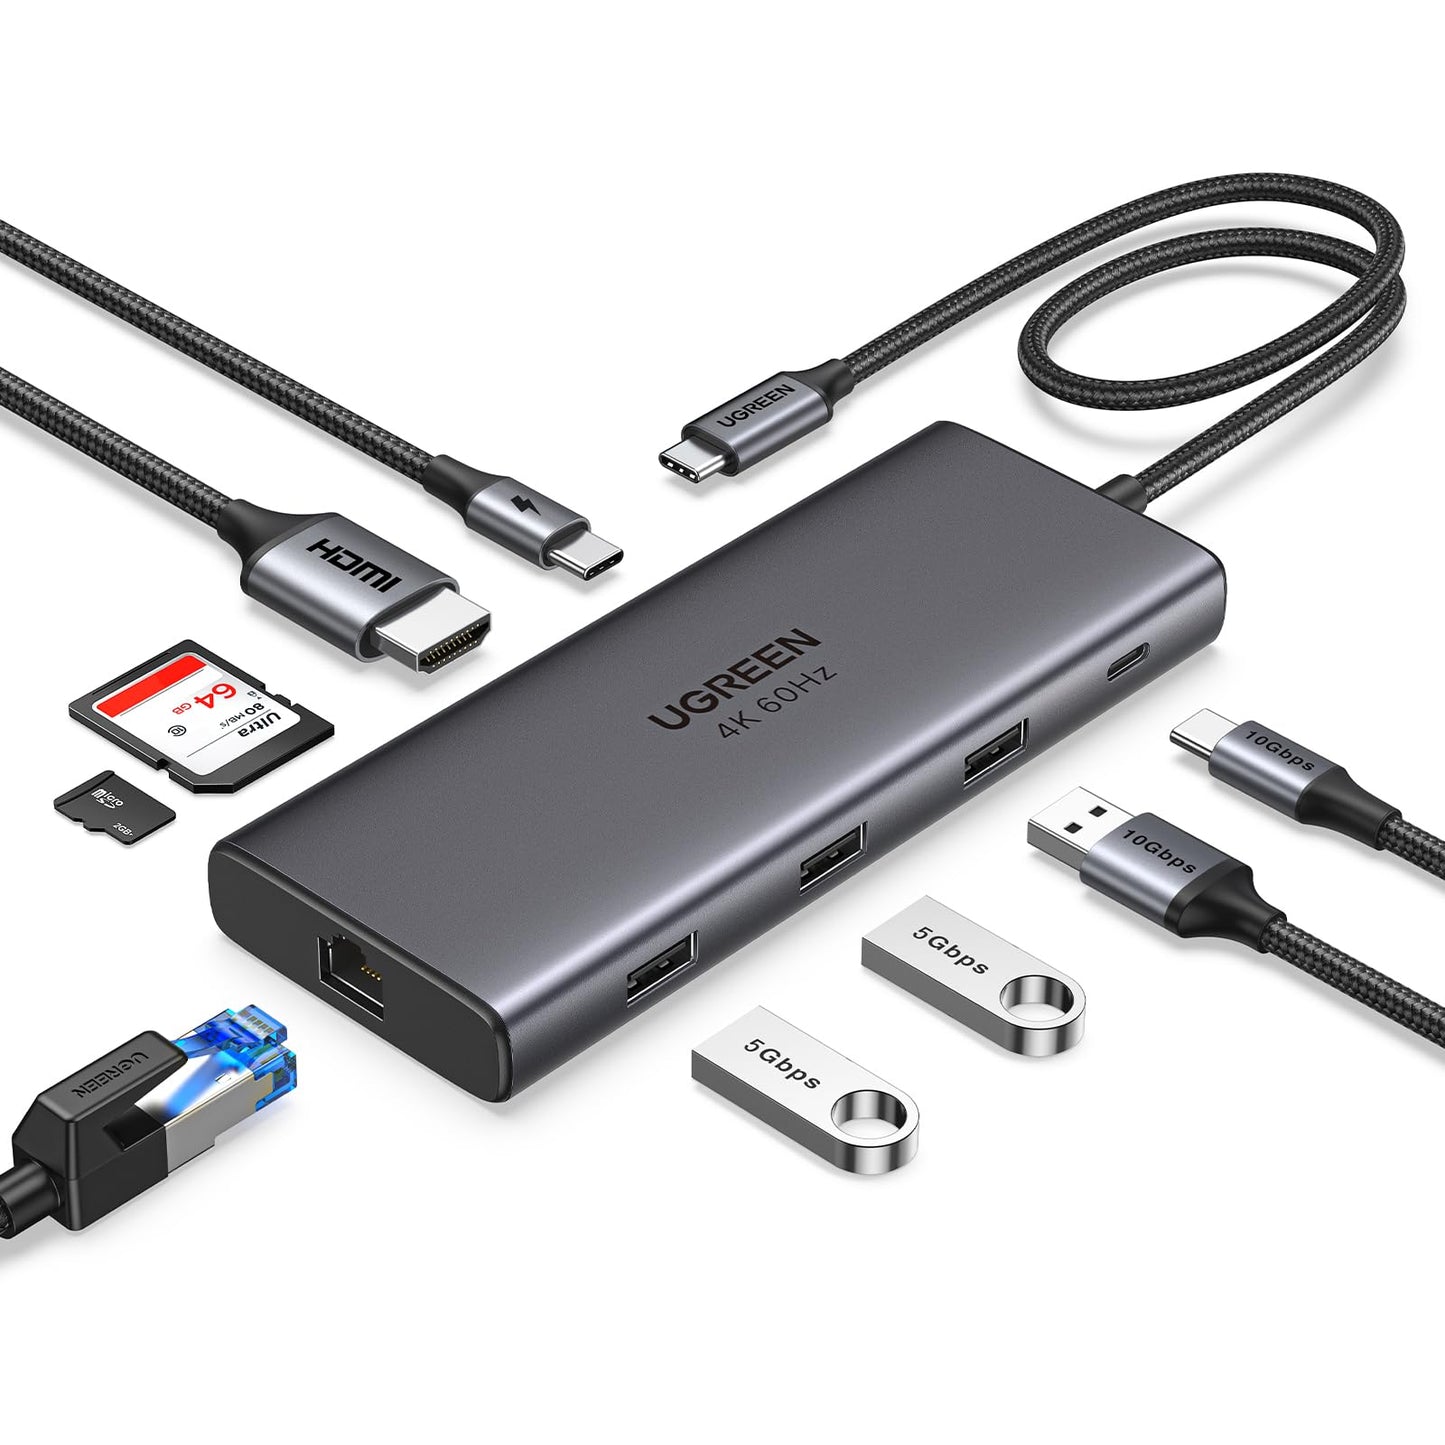 UGREEN Revodok Pro 109 USB C Hub 9 in 1 10Gbps USB C 3.2 & USBA 3.2 4K HDMI, 100W Power Delivery, SD/TF Card Reader Gigabit Ethernet for MacBook Pro/Air,iPhone 15 Pro/Pro Max, Thinkpad and More.